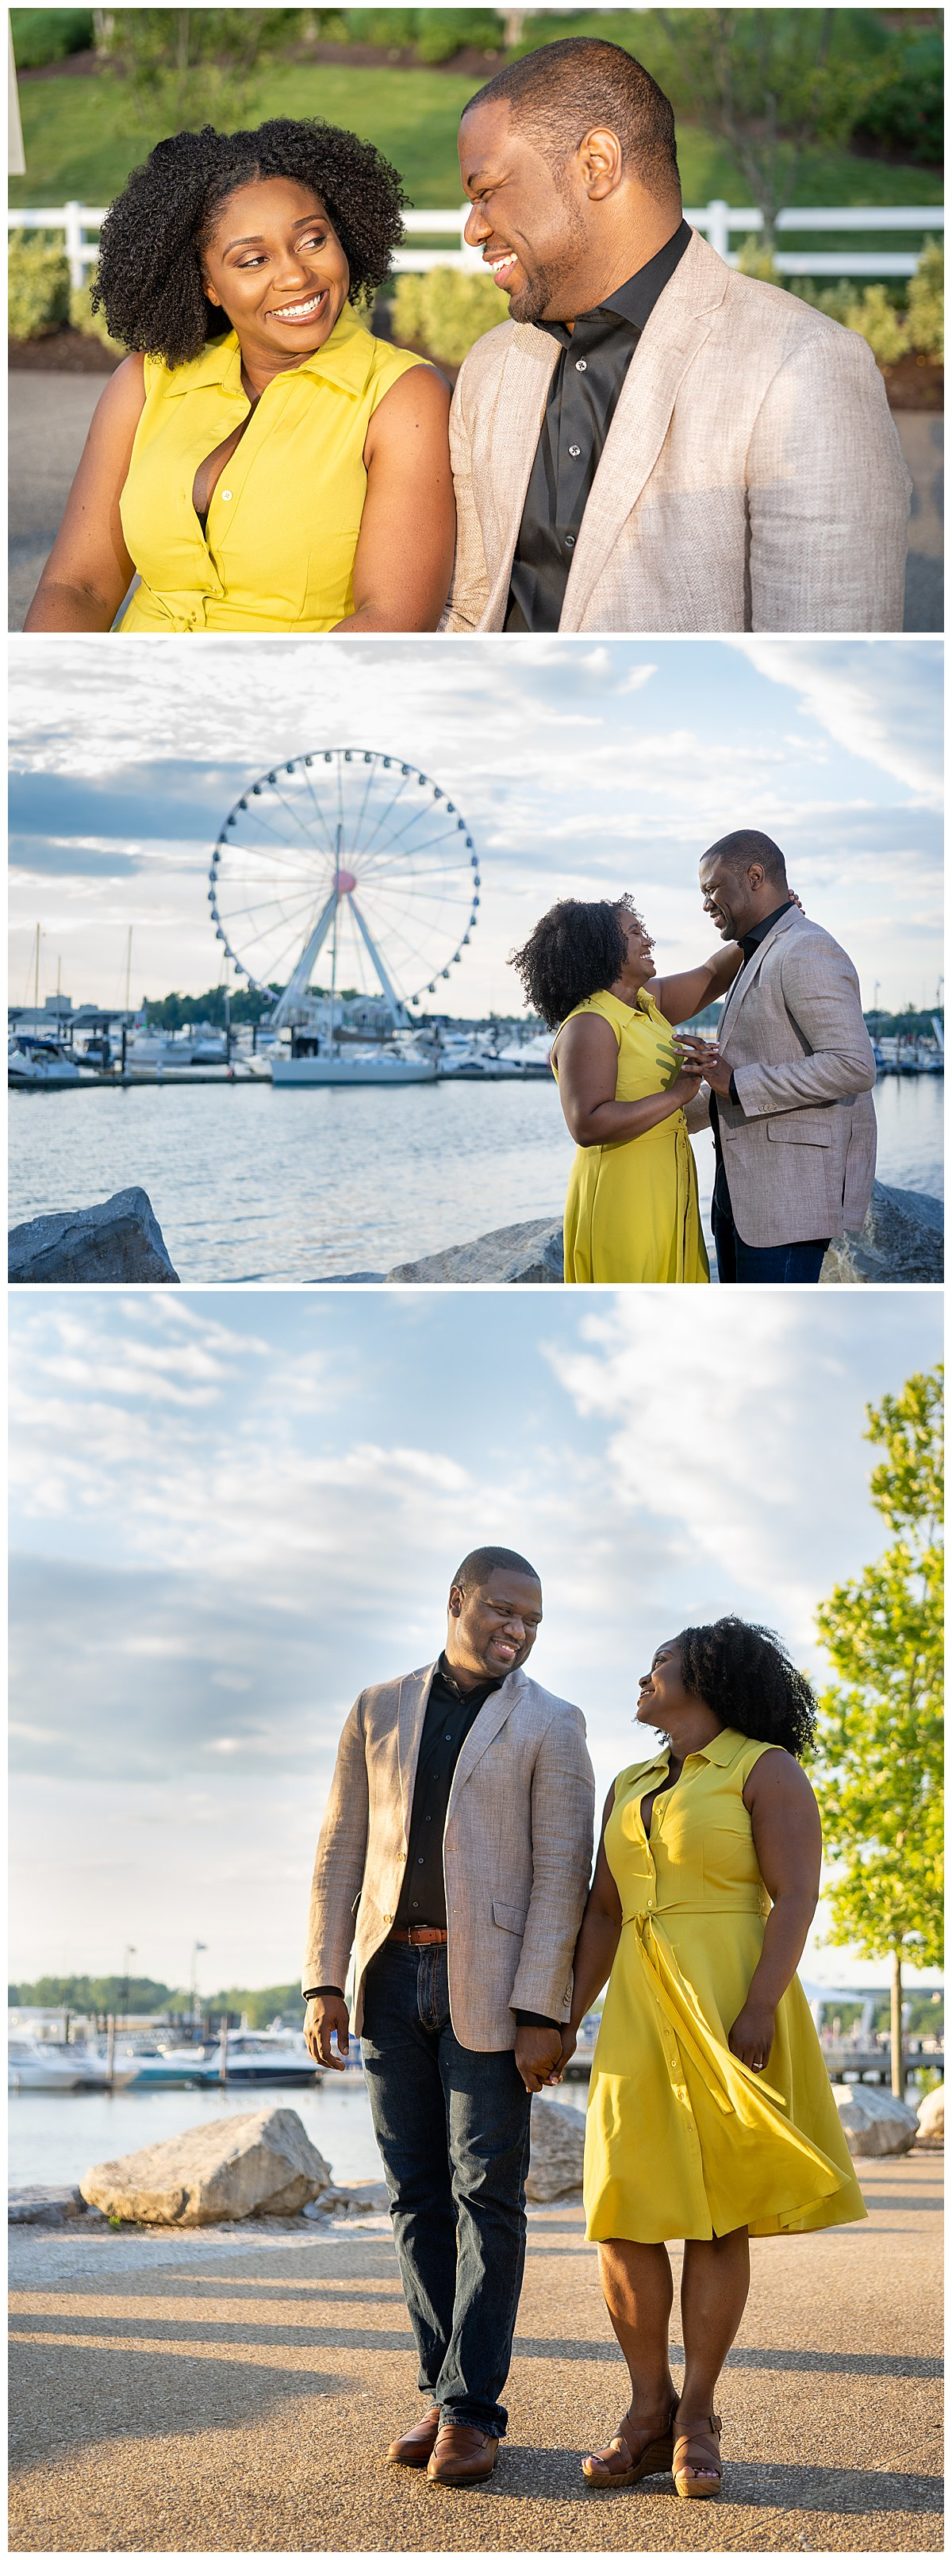 Couple sits on a bench, dance with a ferris wheel behind him, and walk near the water.